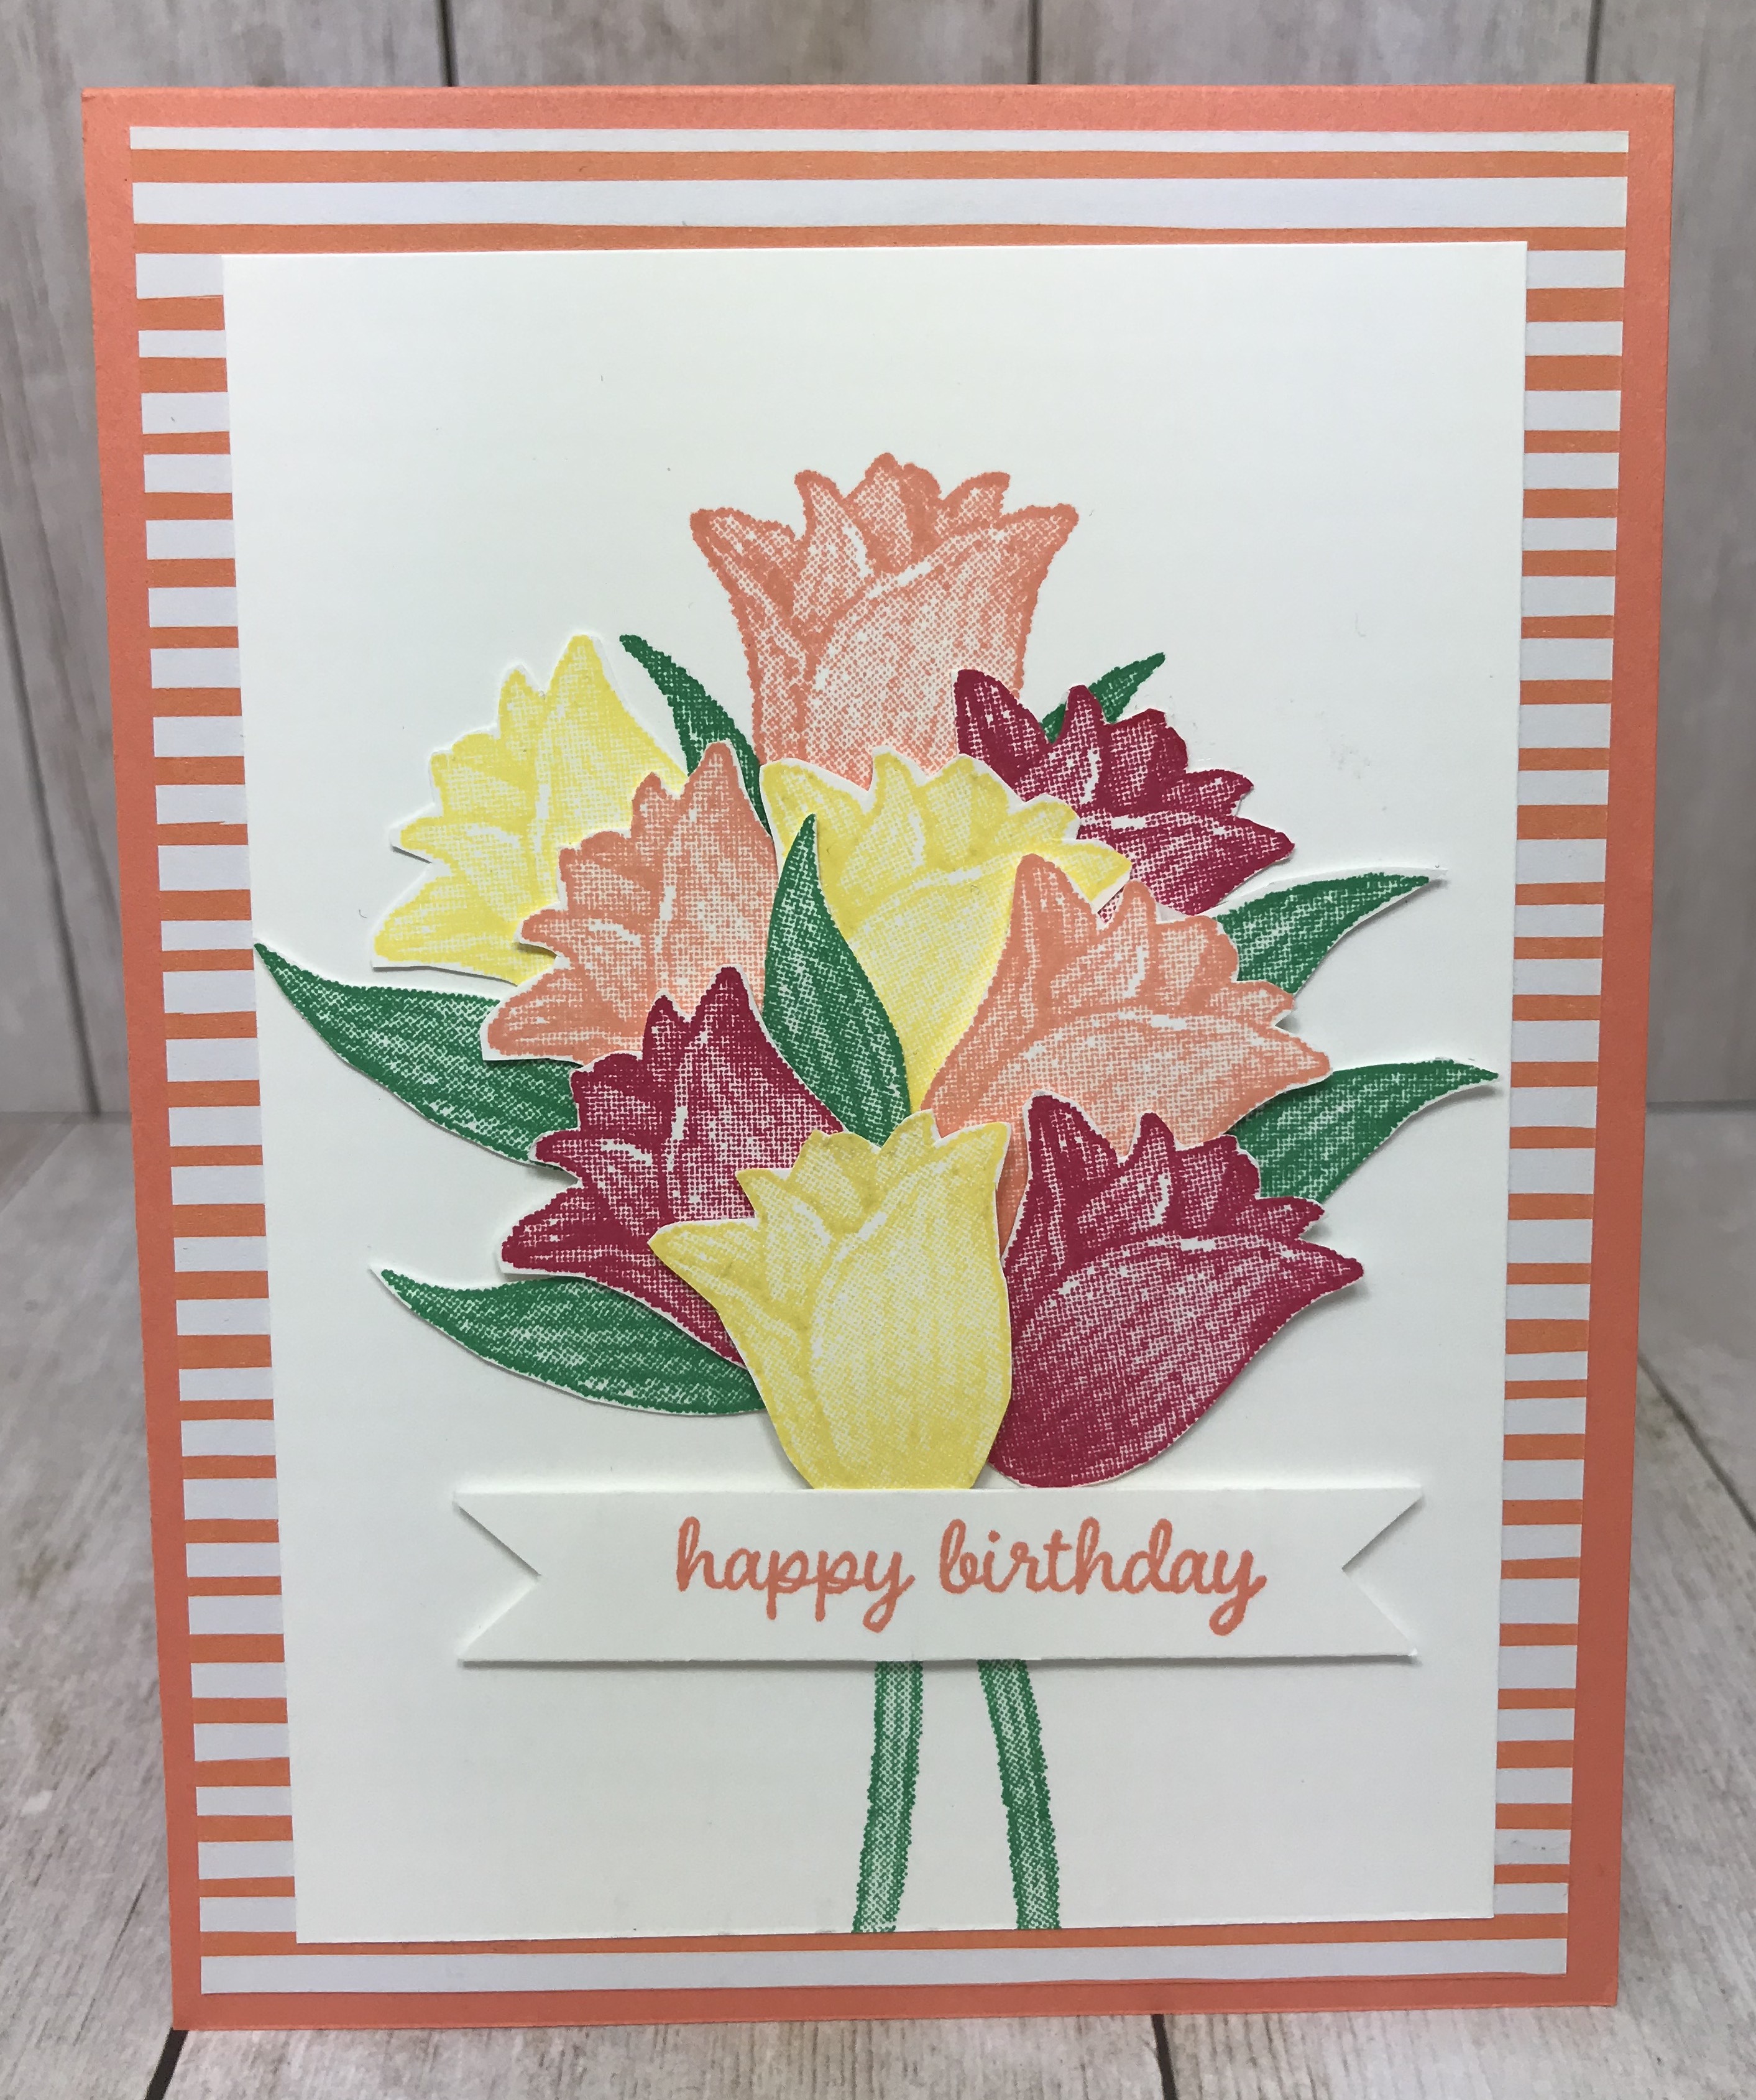 This is a team stamp camp card done by Julie Carte. My challenge for April was Simple Stamping. Details are on my blog here: https://wp.me/p59VWq-aYX #stampinup #thestampcamp #simplestamping